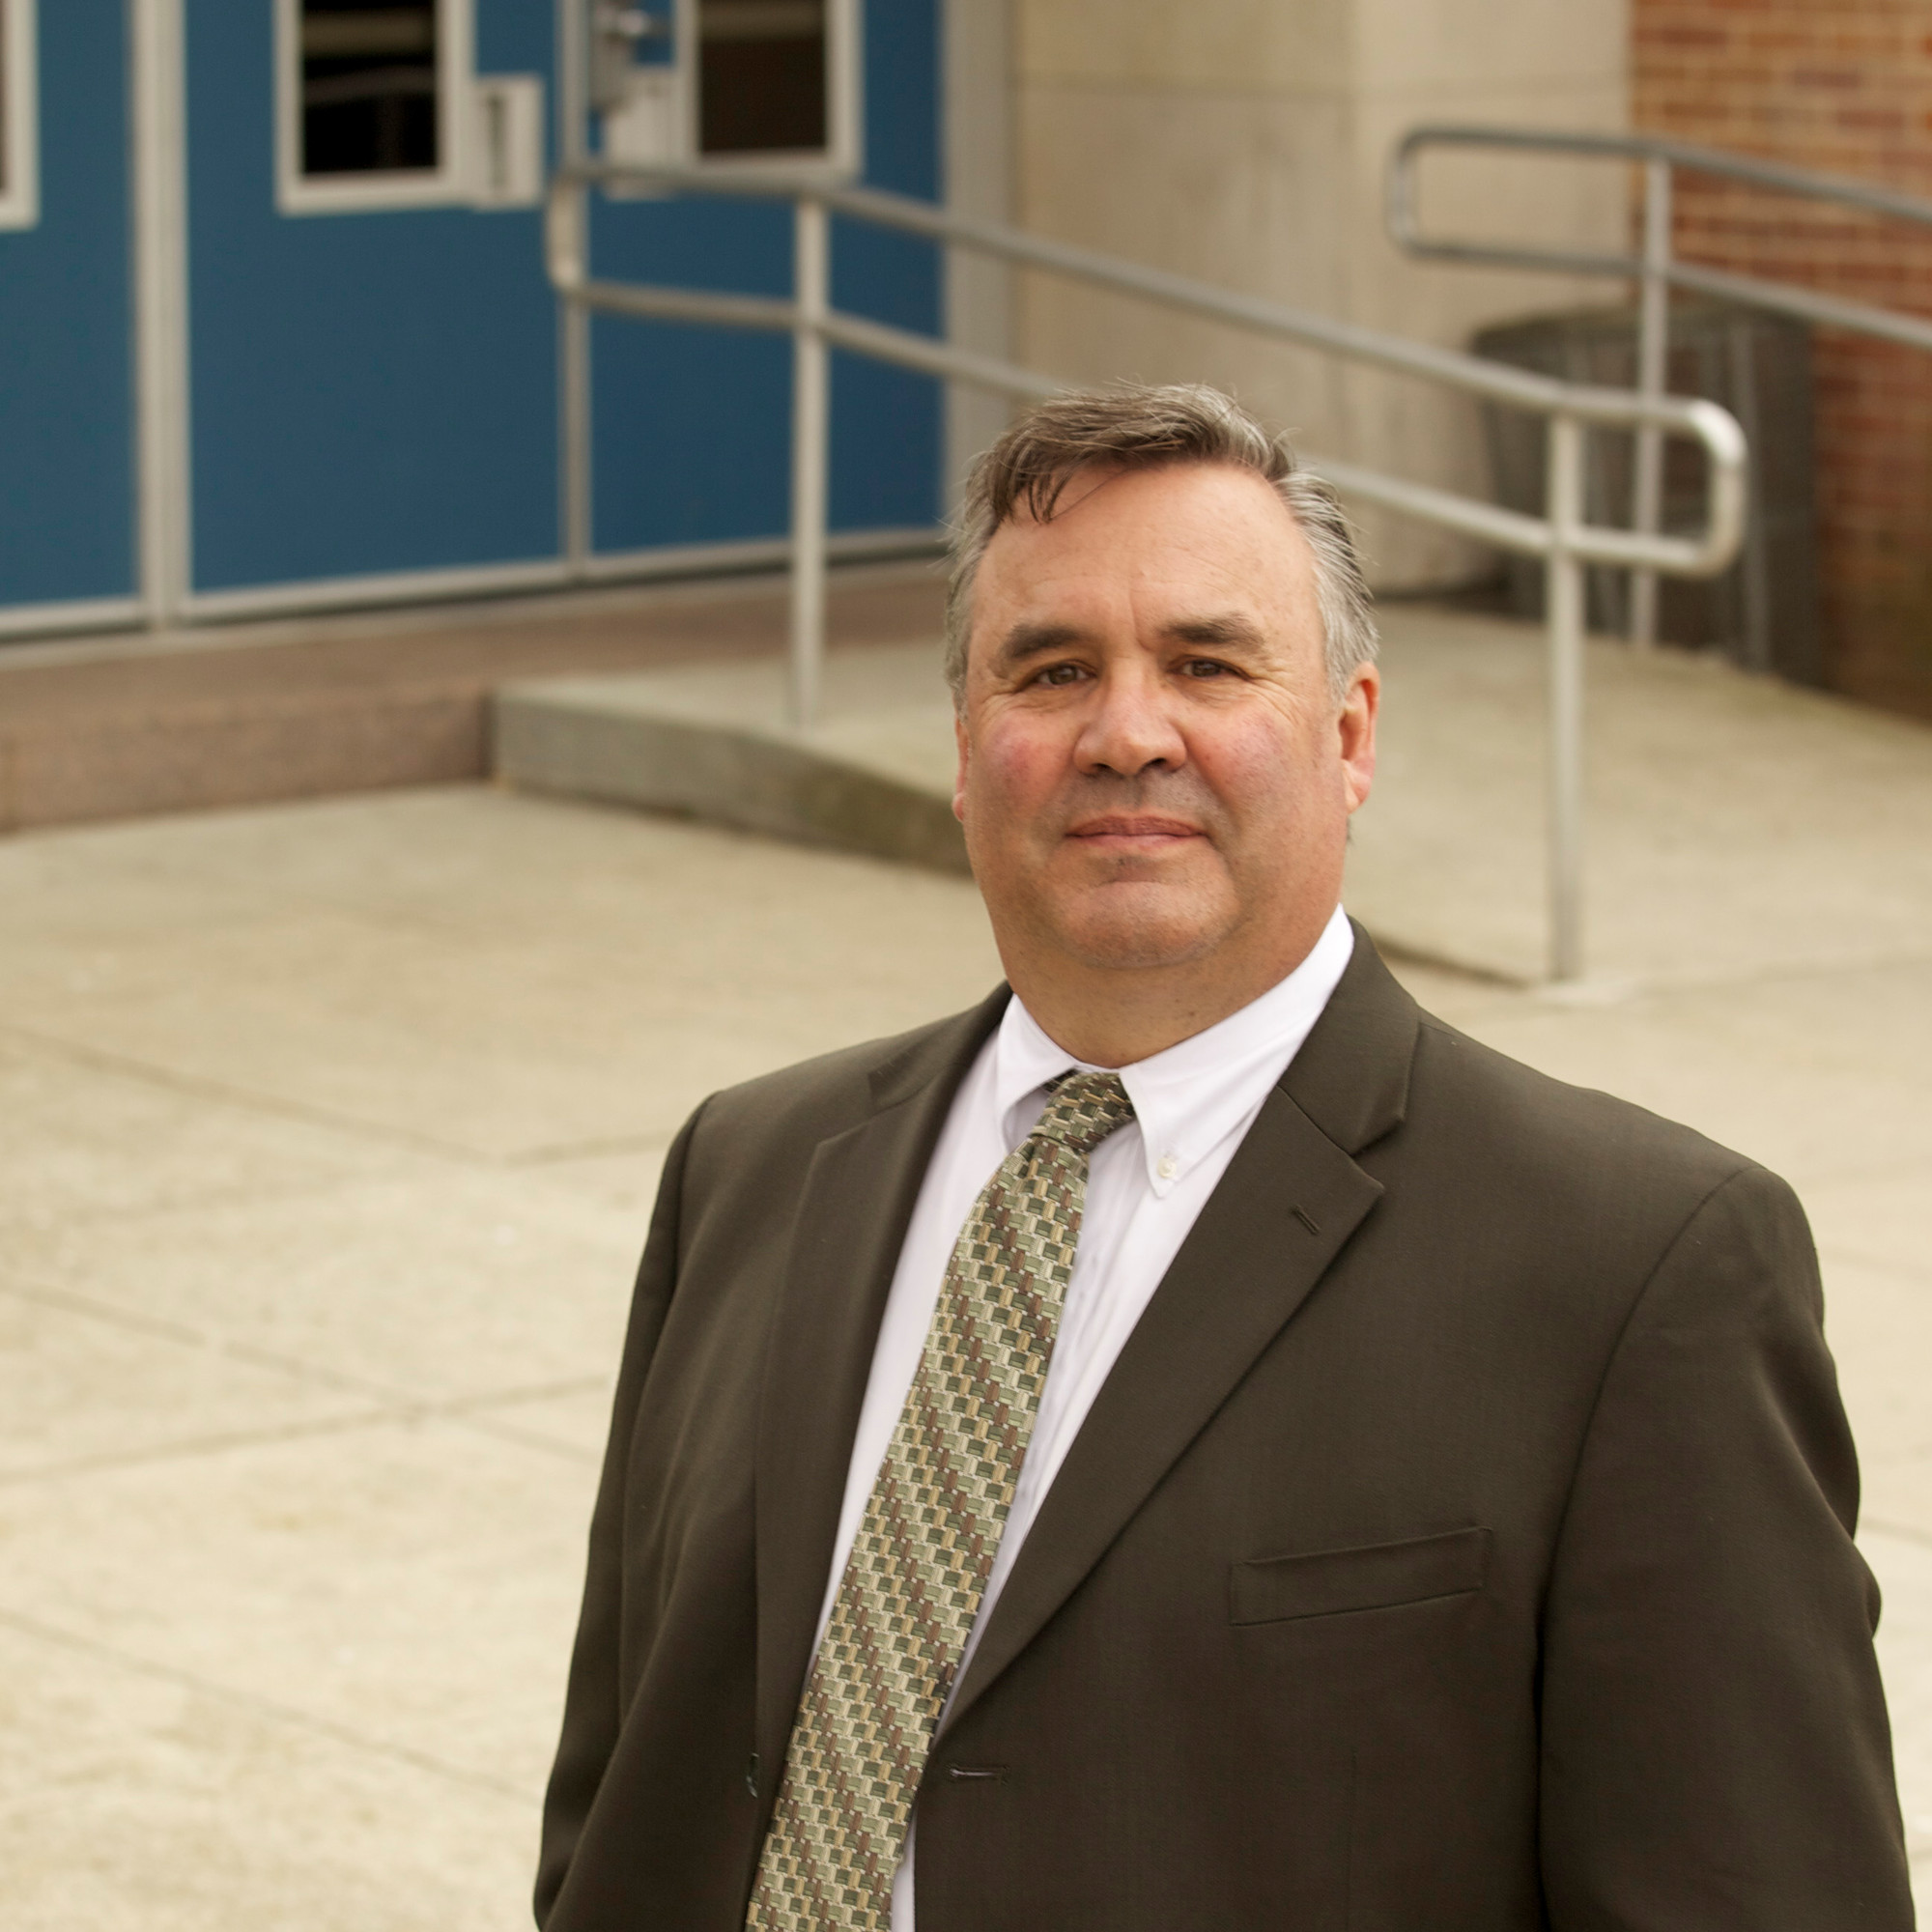 The Herald asked the new superintendent about what the job means to him, and about the biggest challenges Baldwin schools will face going forward.